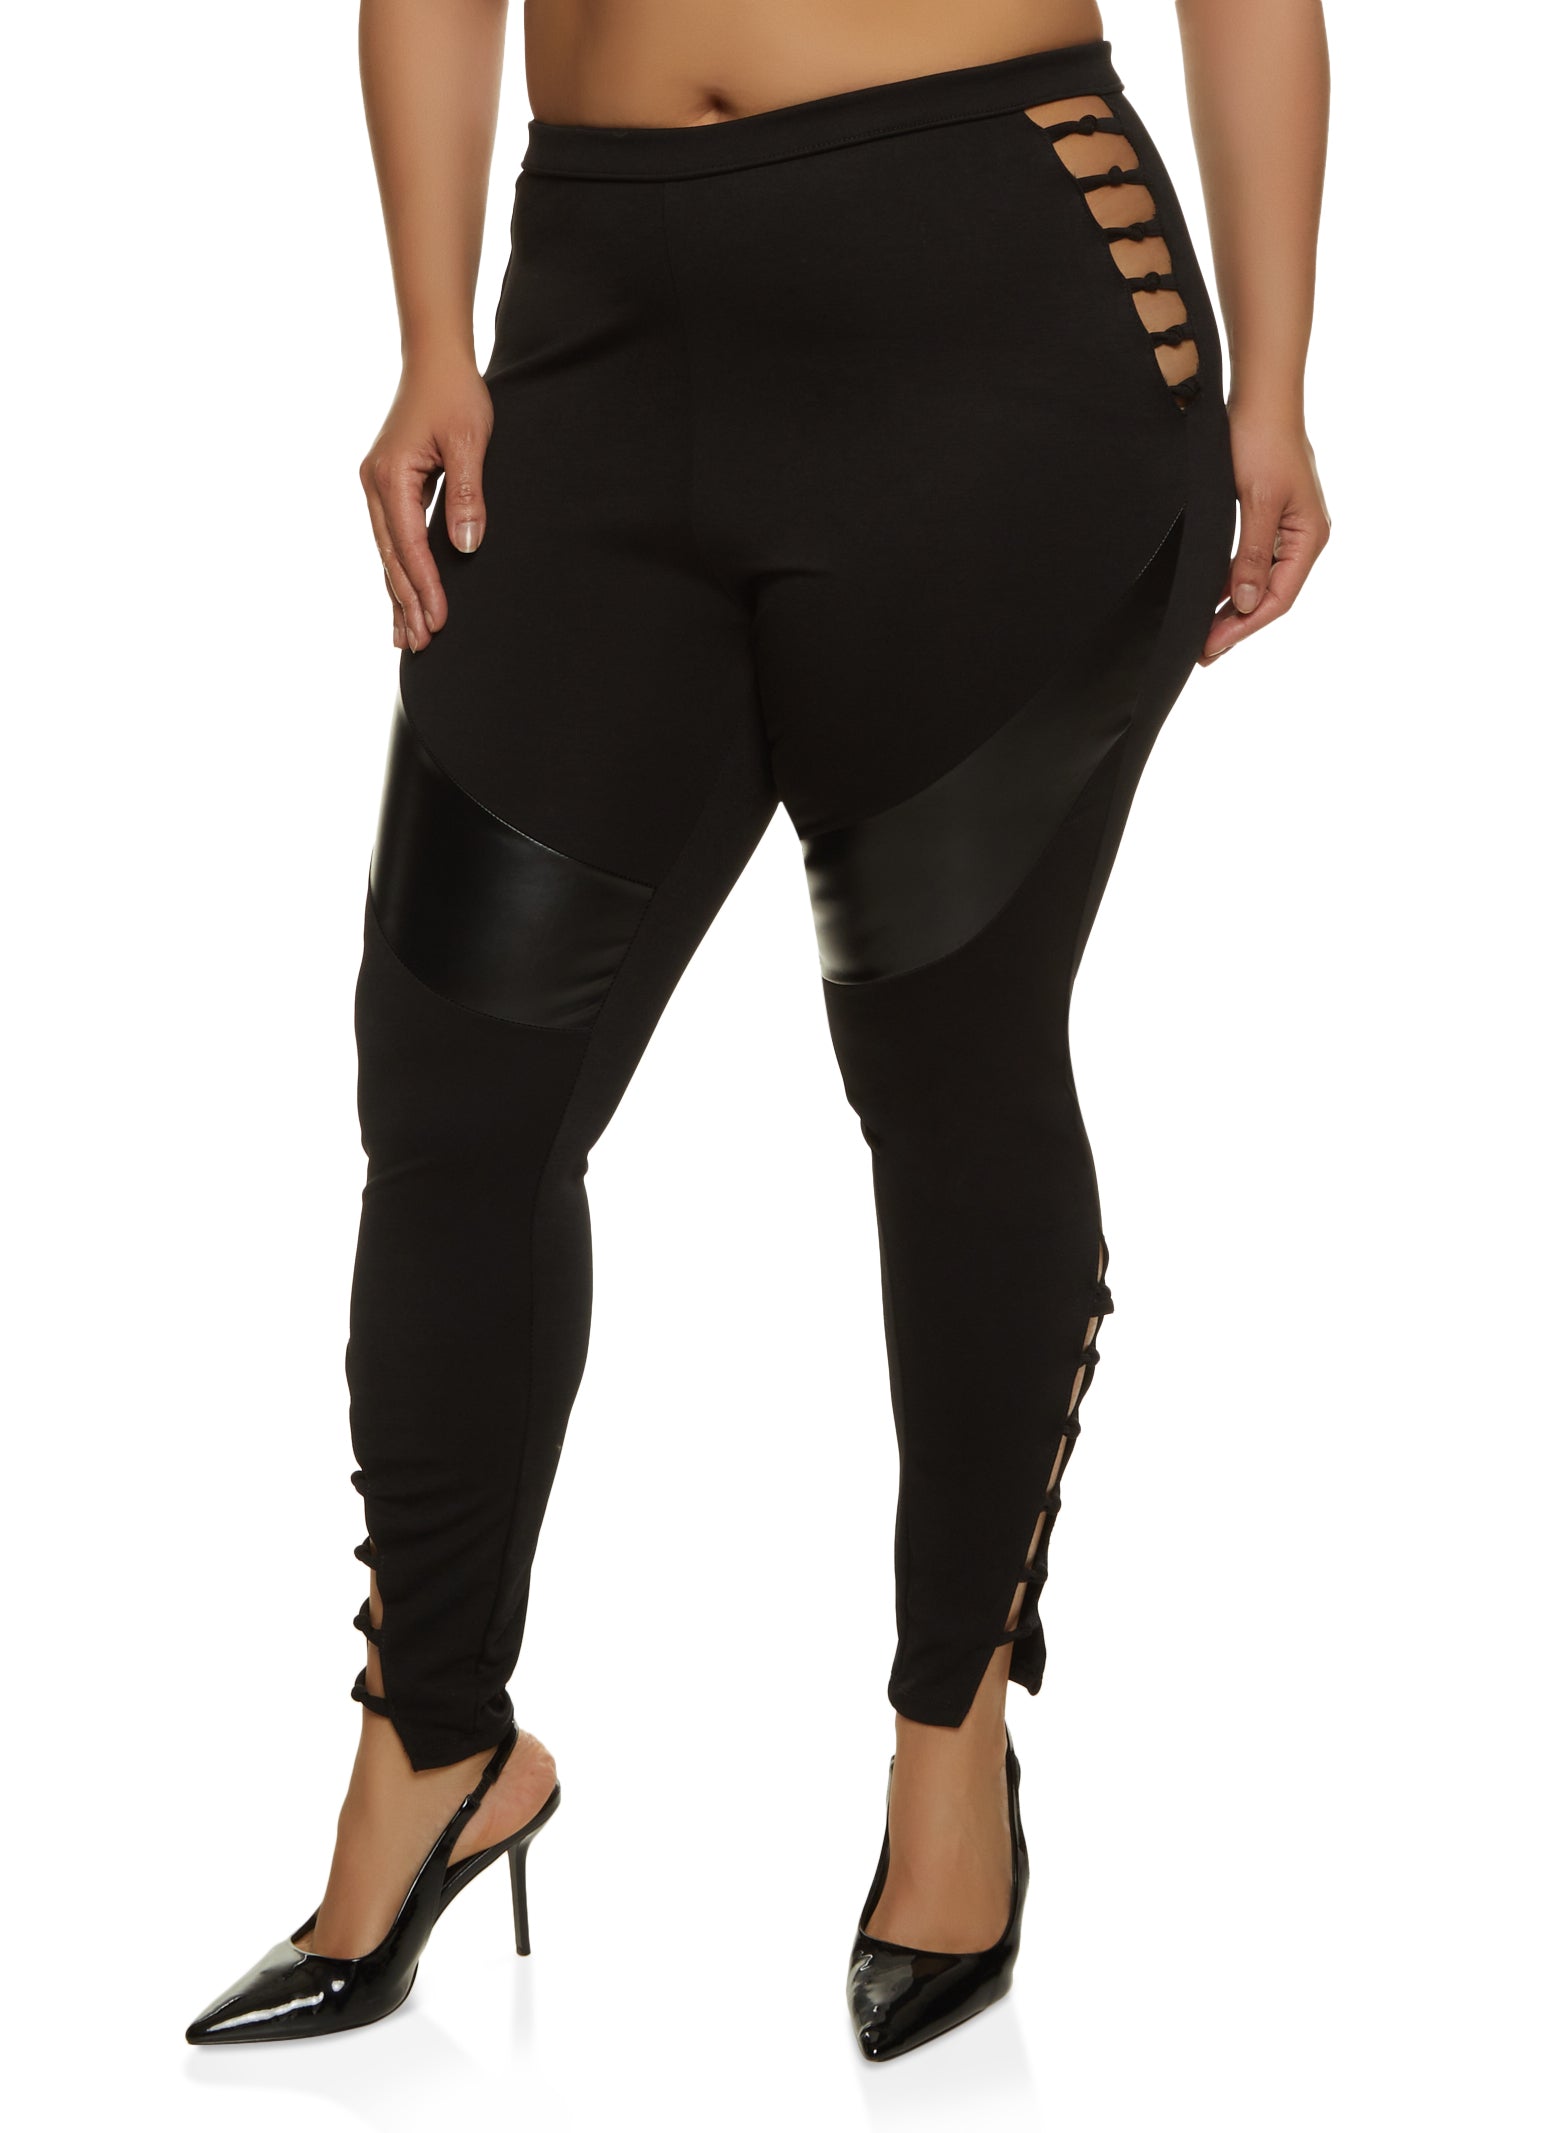 Plus Size Lace High Waisted Leggings